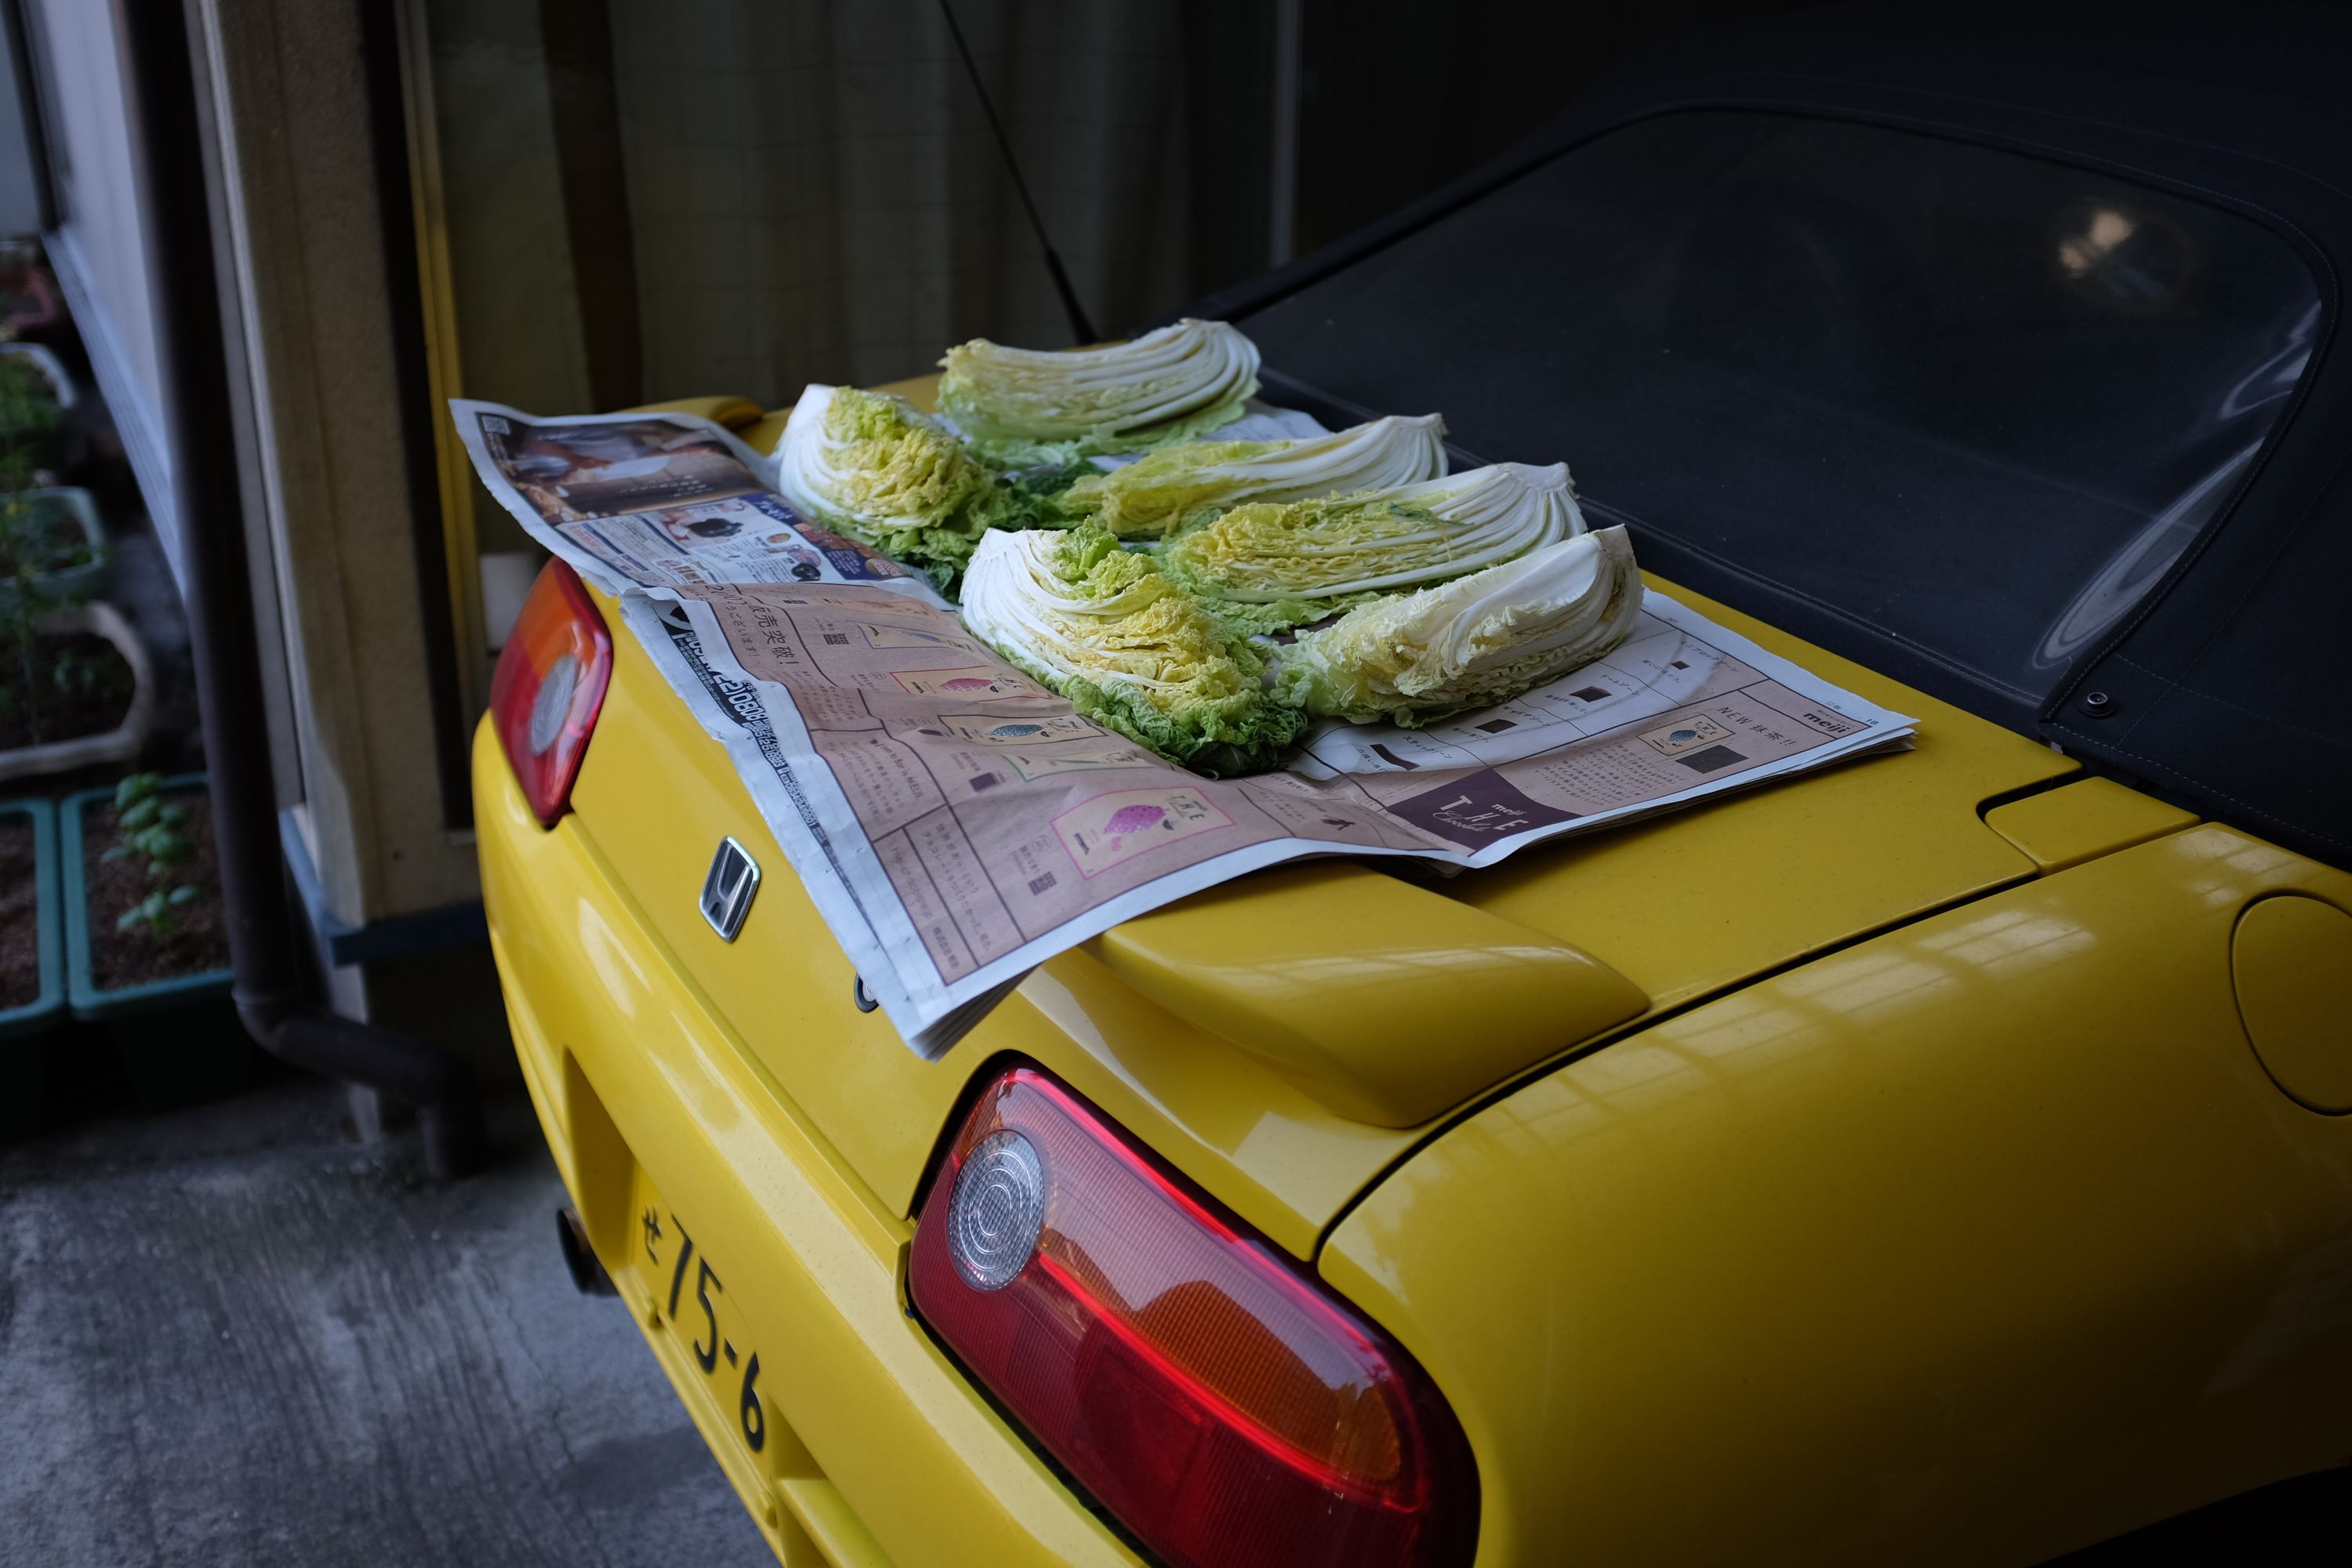 Some heads of cabbage drying on the rear engine cover of a tiny yellow sports car, a Honda Beat.